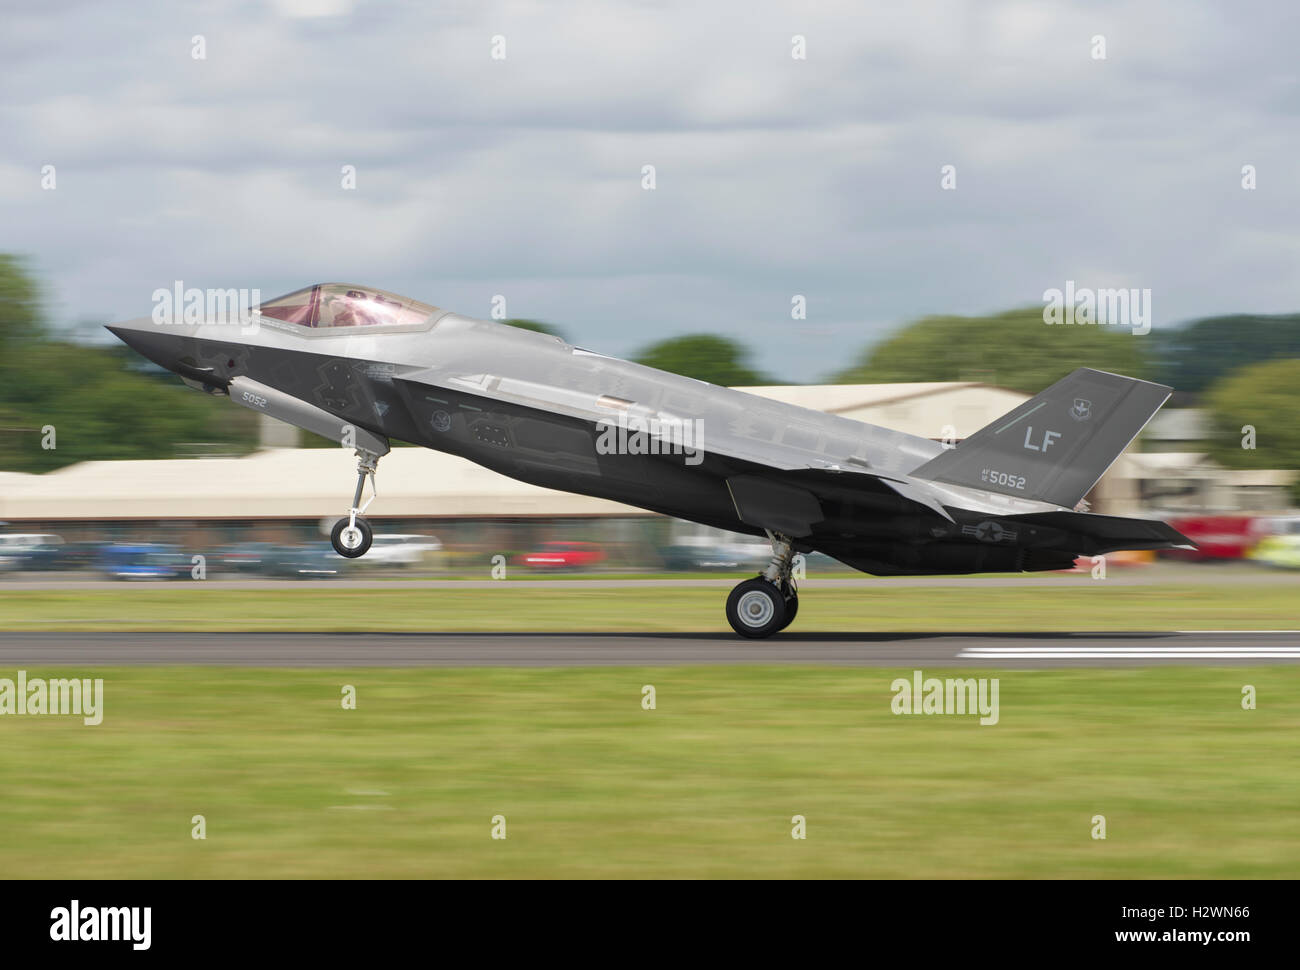 Lockheed Martin F-35A Lightning II stealth fighter touches down at Fairford during the 2016 Royal Air Tattoo Stock Photo